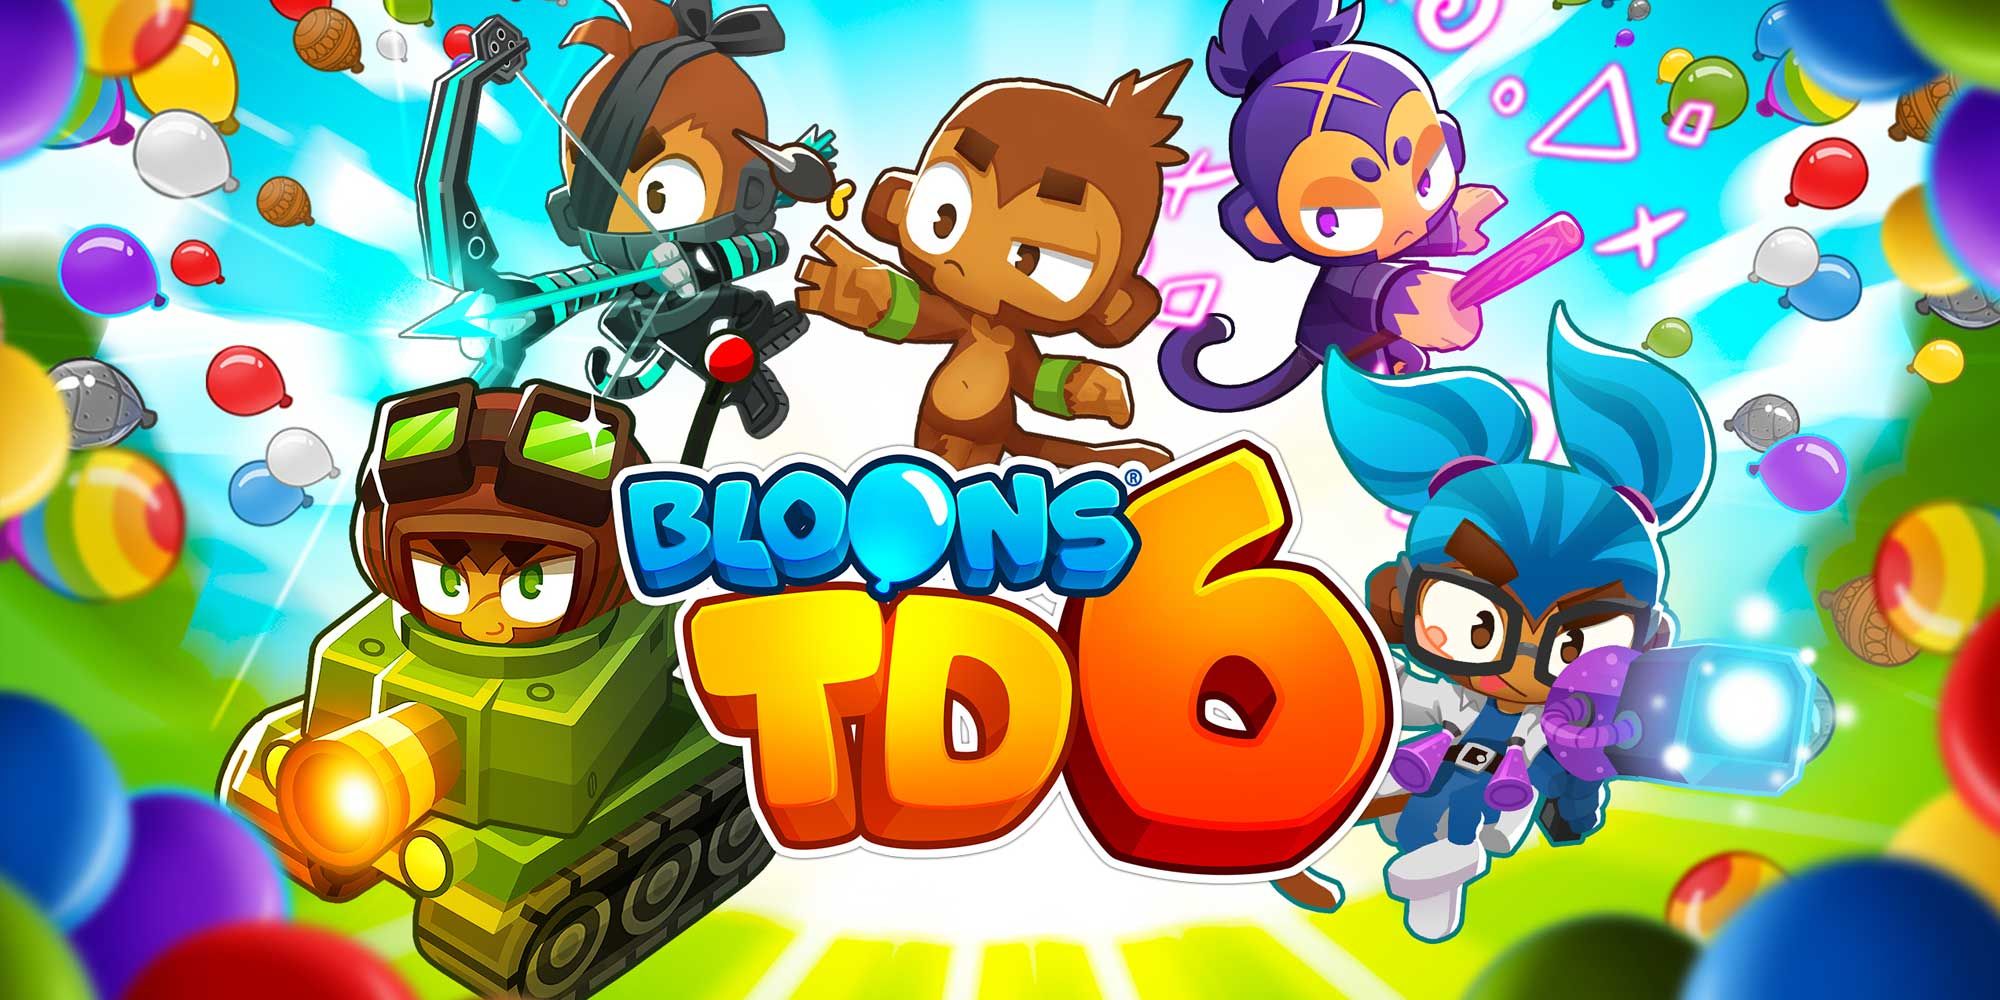 The Only Bloons Tower Defense Games Tier List That Matters